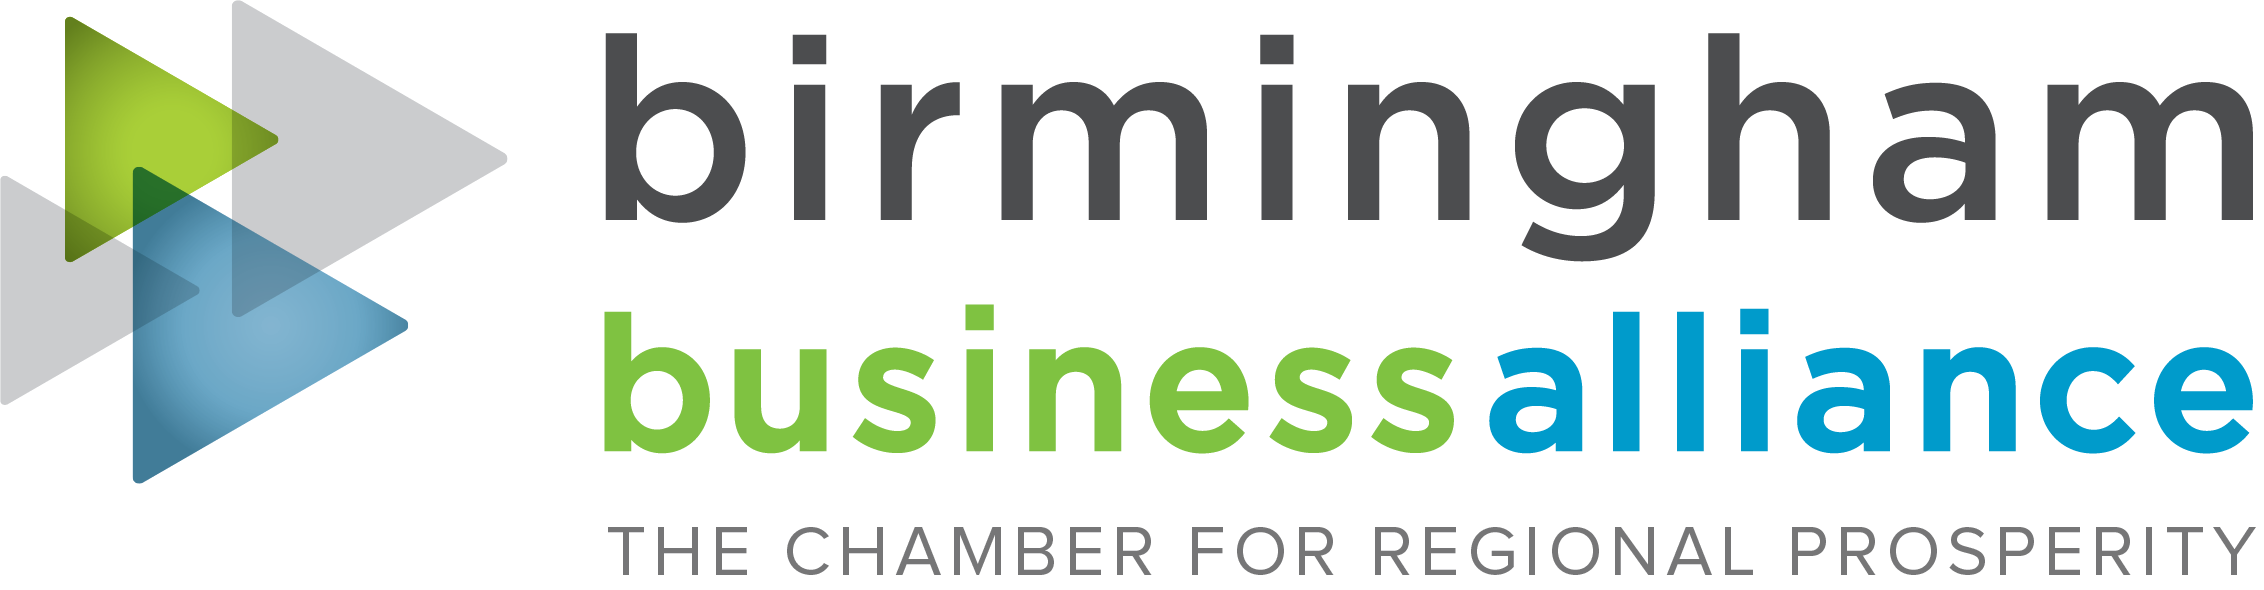 Birmingham Business Alliance - The Chamber for Regional Property